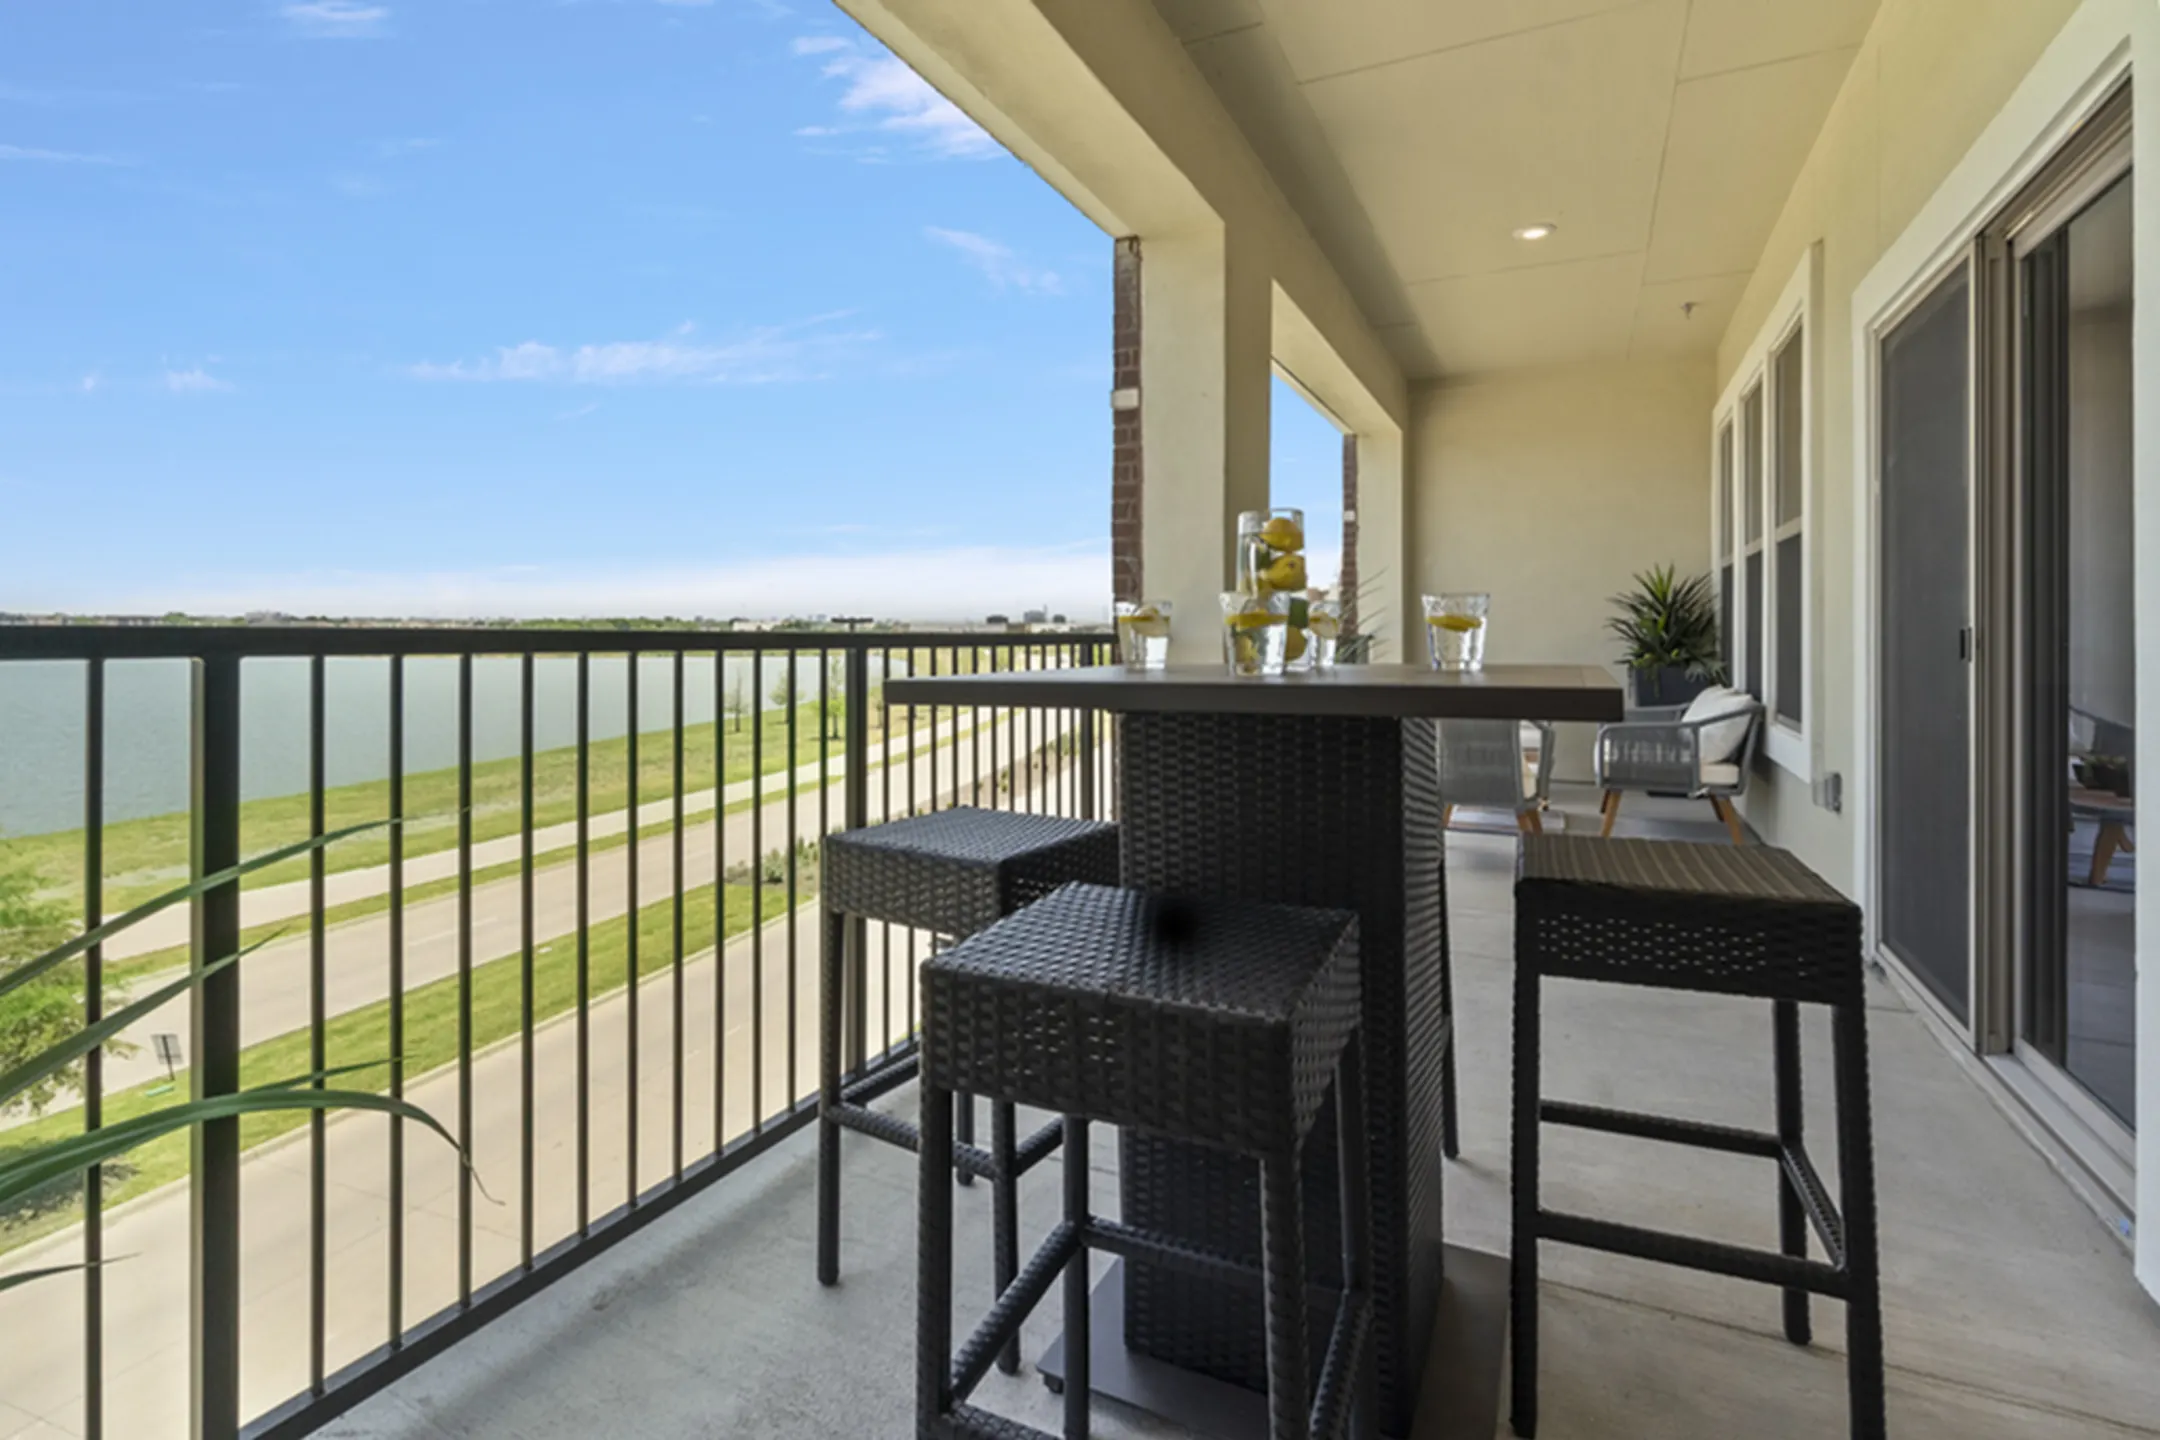 Patio / Deck - The Mansions at Mercer Crossing - Farmers Branch, TX